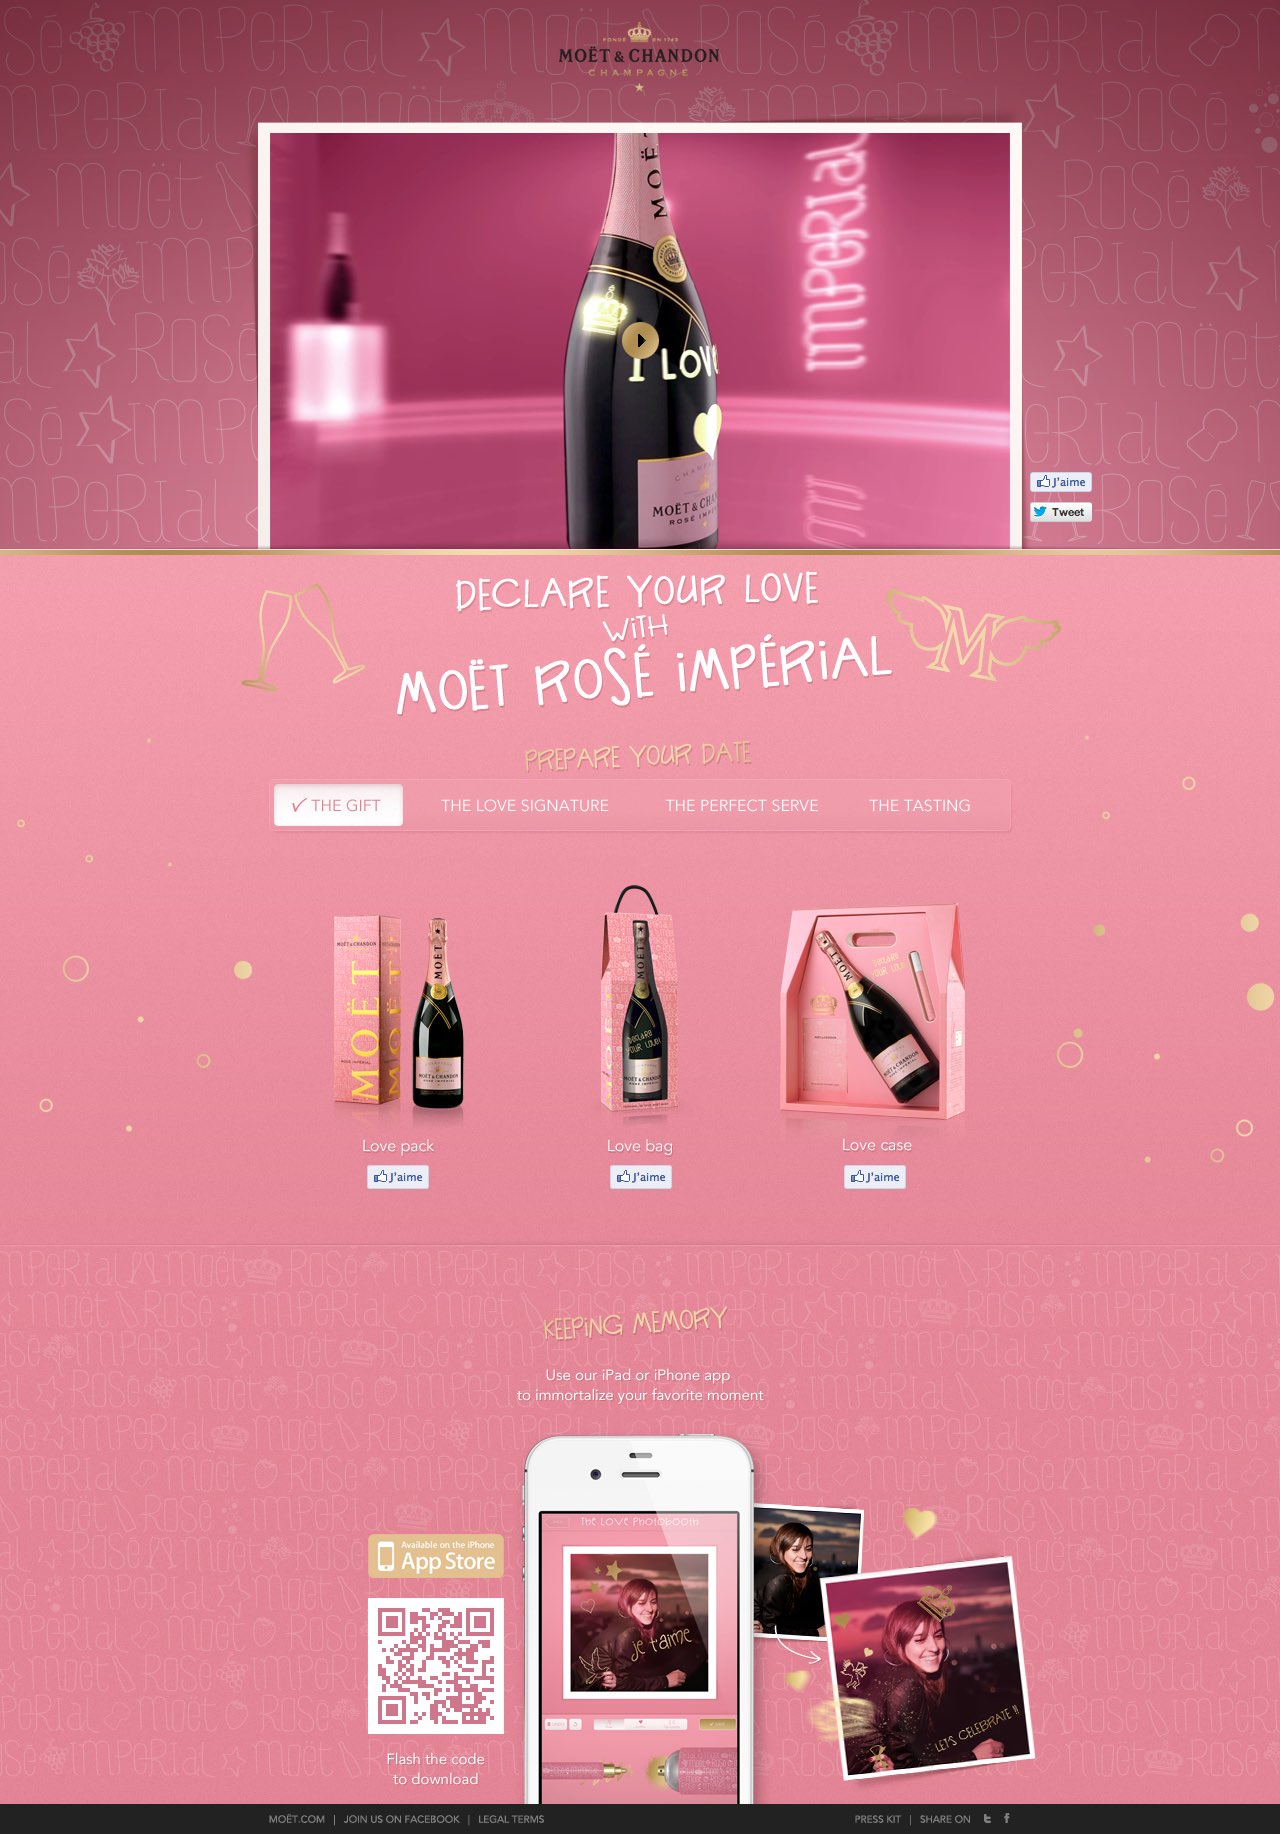 Moet & chandon champagne luxe ui design landing page - mael burgy